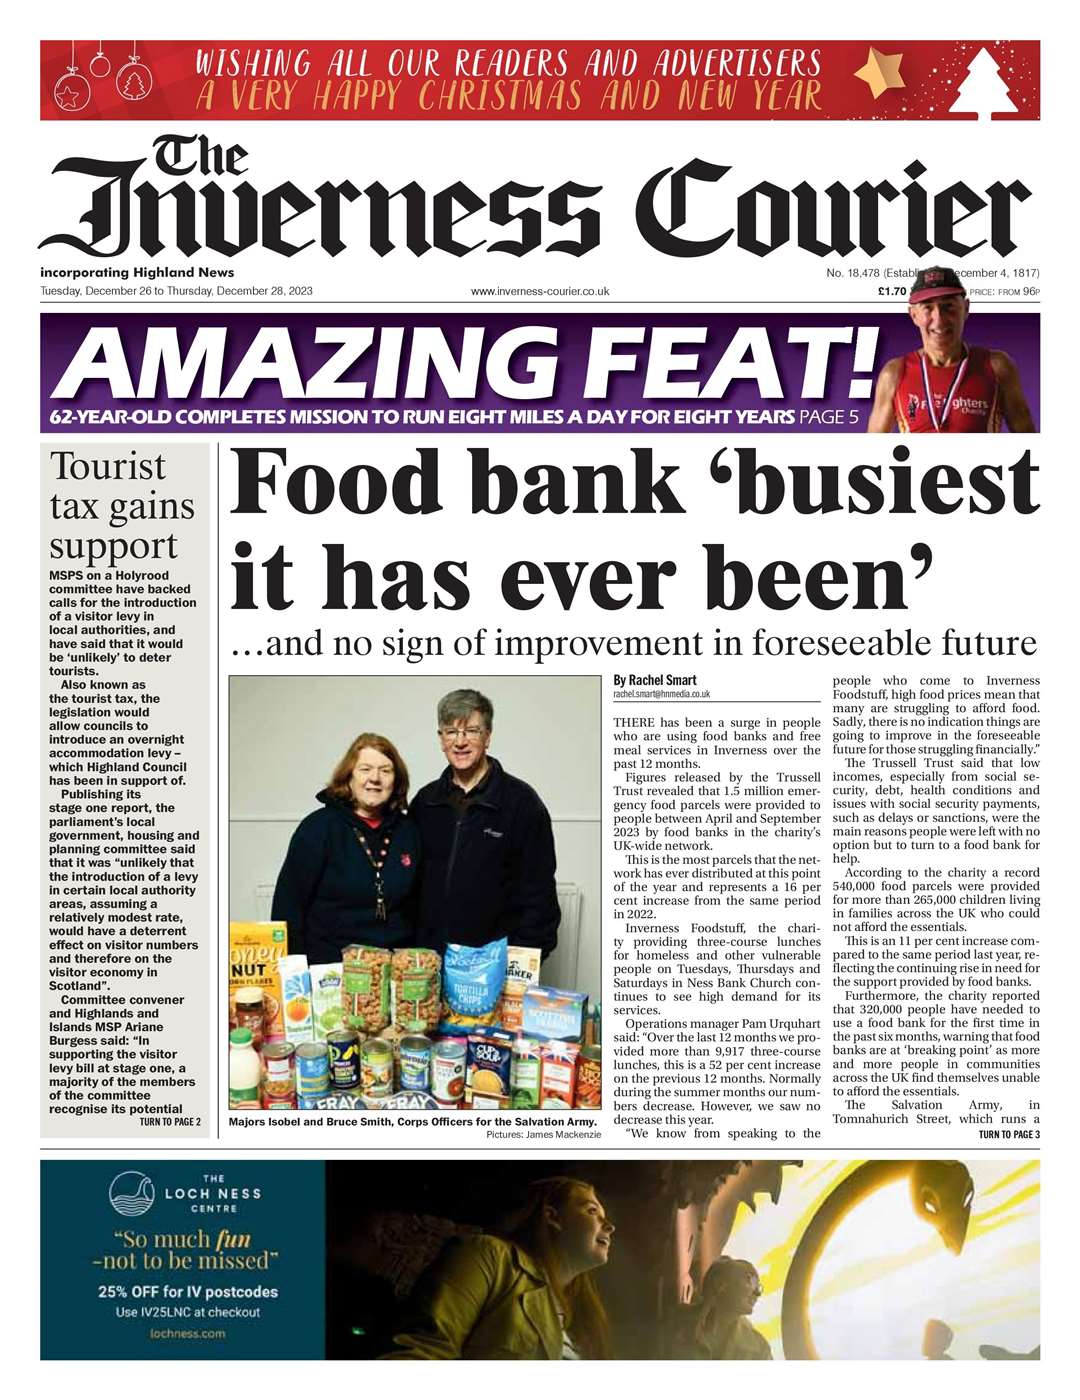 The Inverness Courier, December 26, front page.